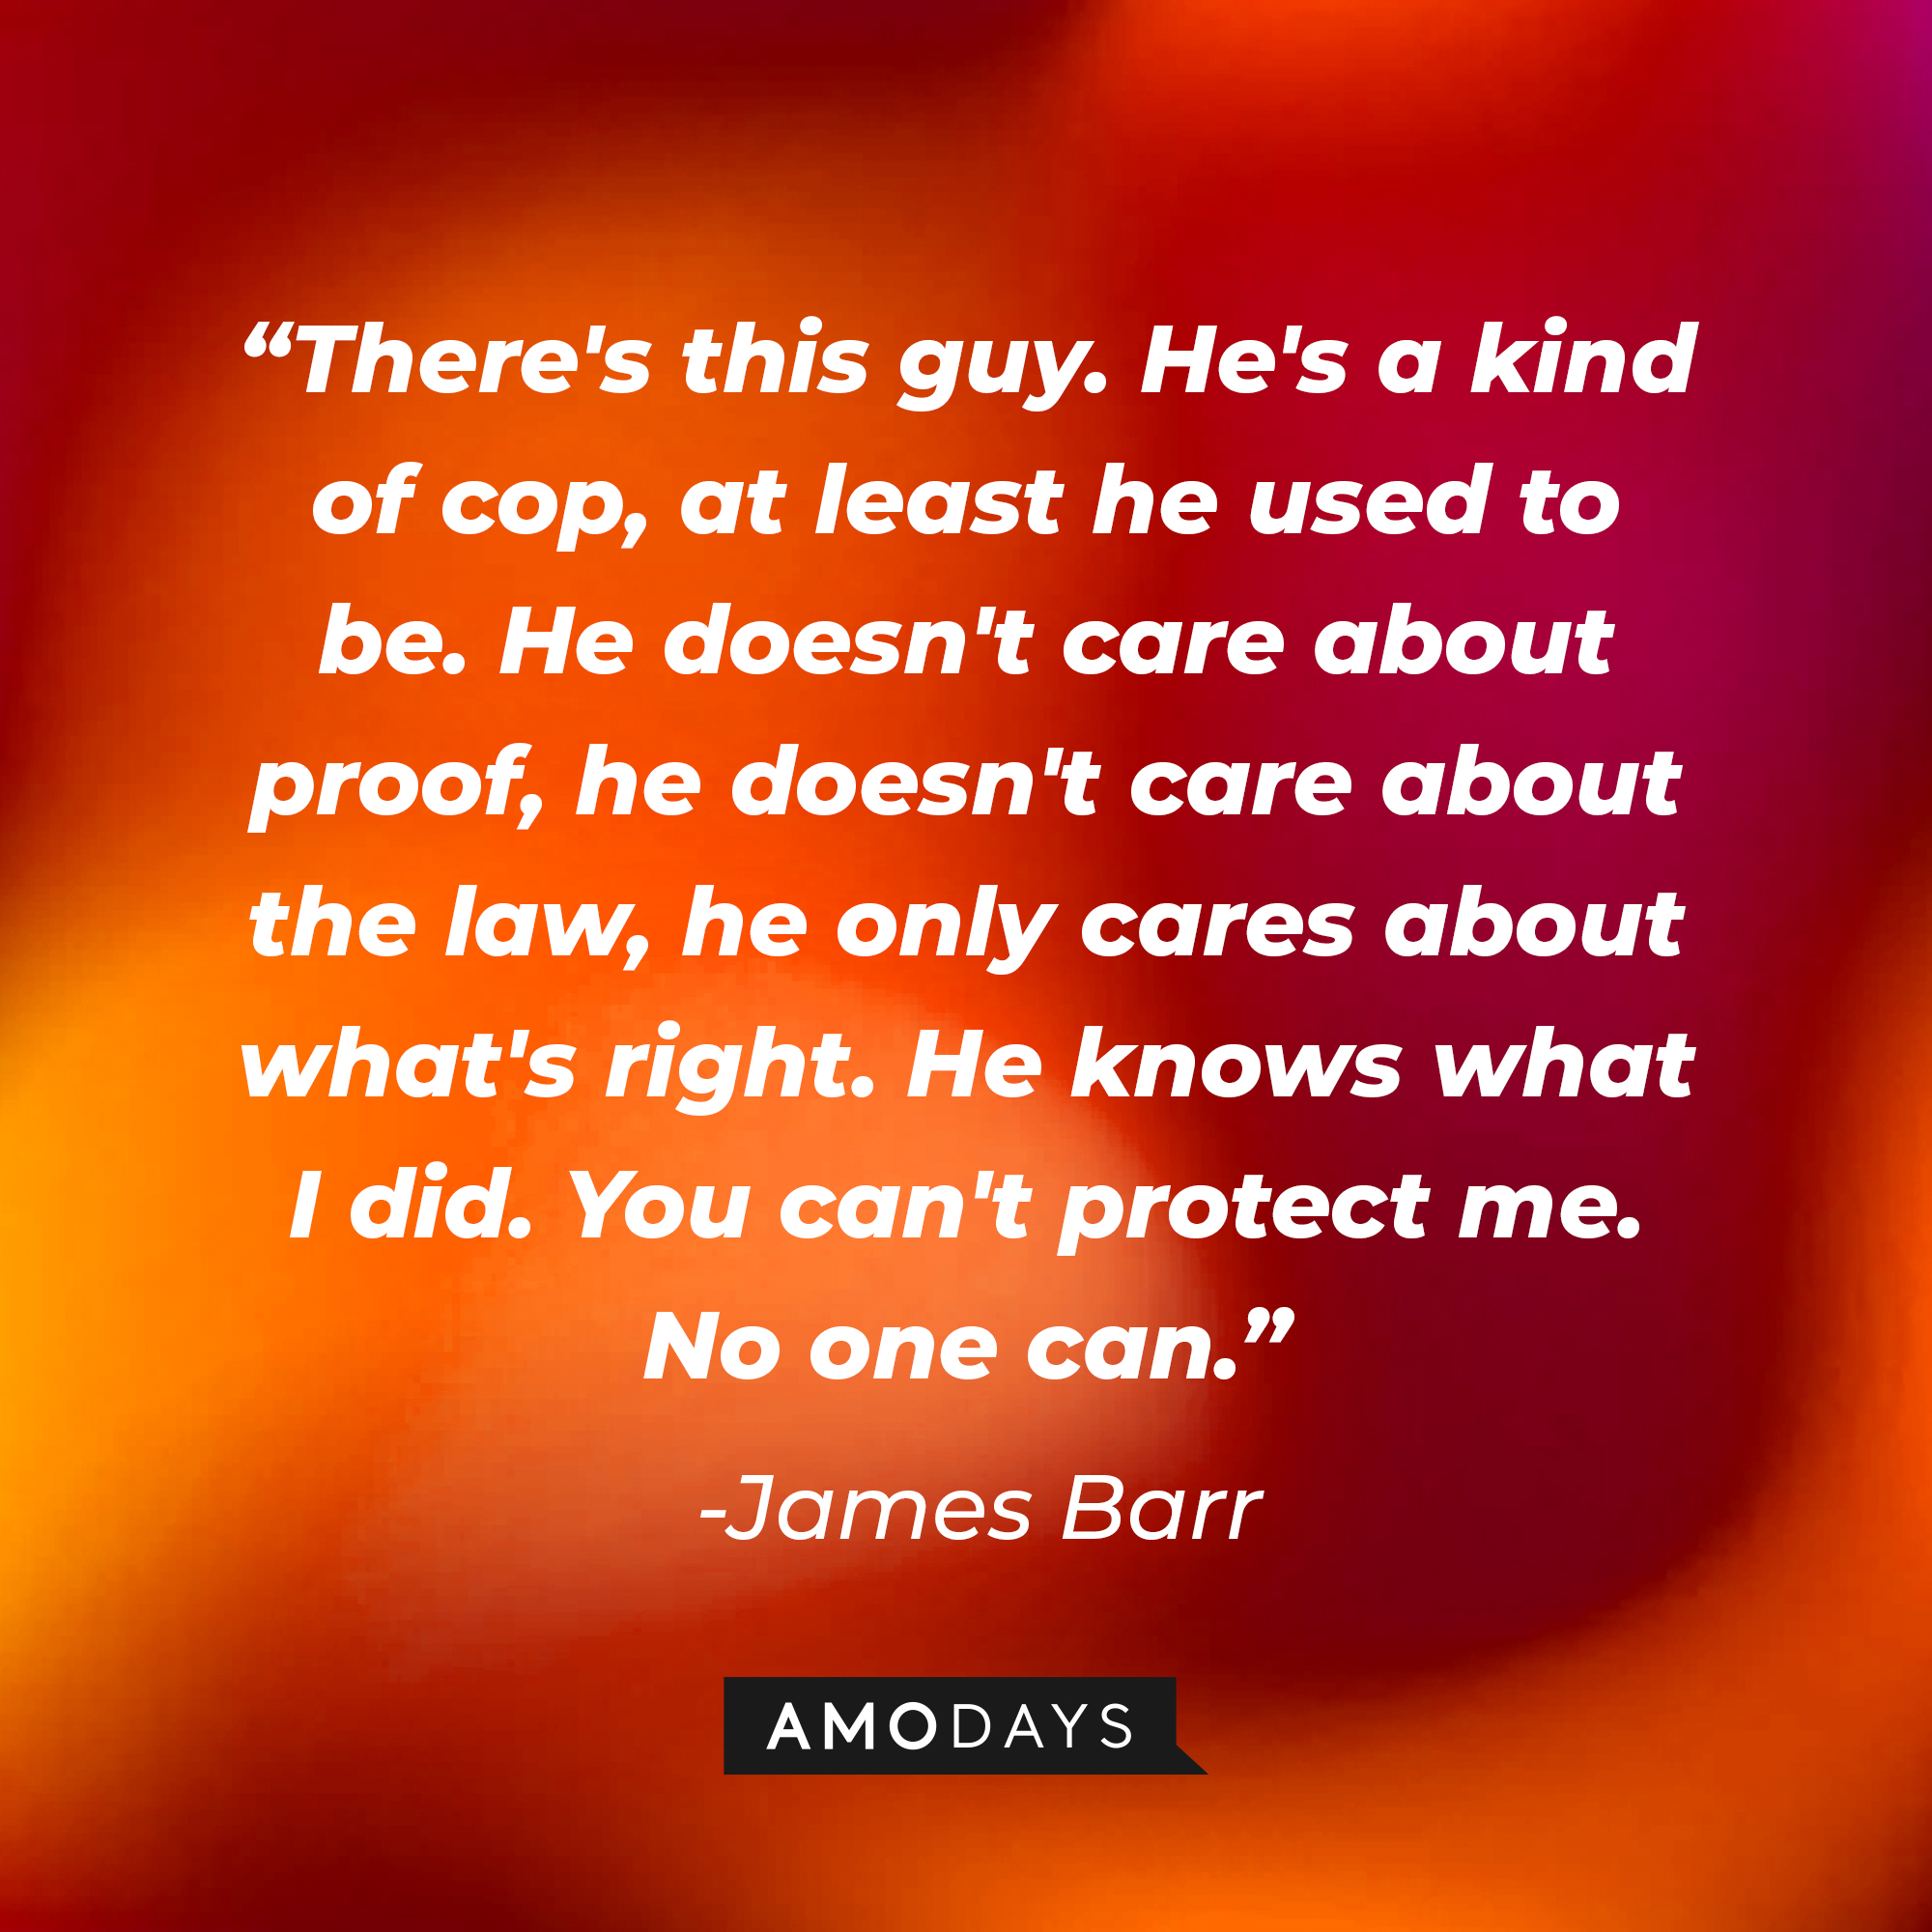 James Barr's quote: "There's this guy. He's a kind of cop, at least he used to be. He doesn't care about proof, he doesn't care about the law, he only cares about what's right. He knows what I did. You can't protect me. No one can" | Source: Amodays